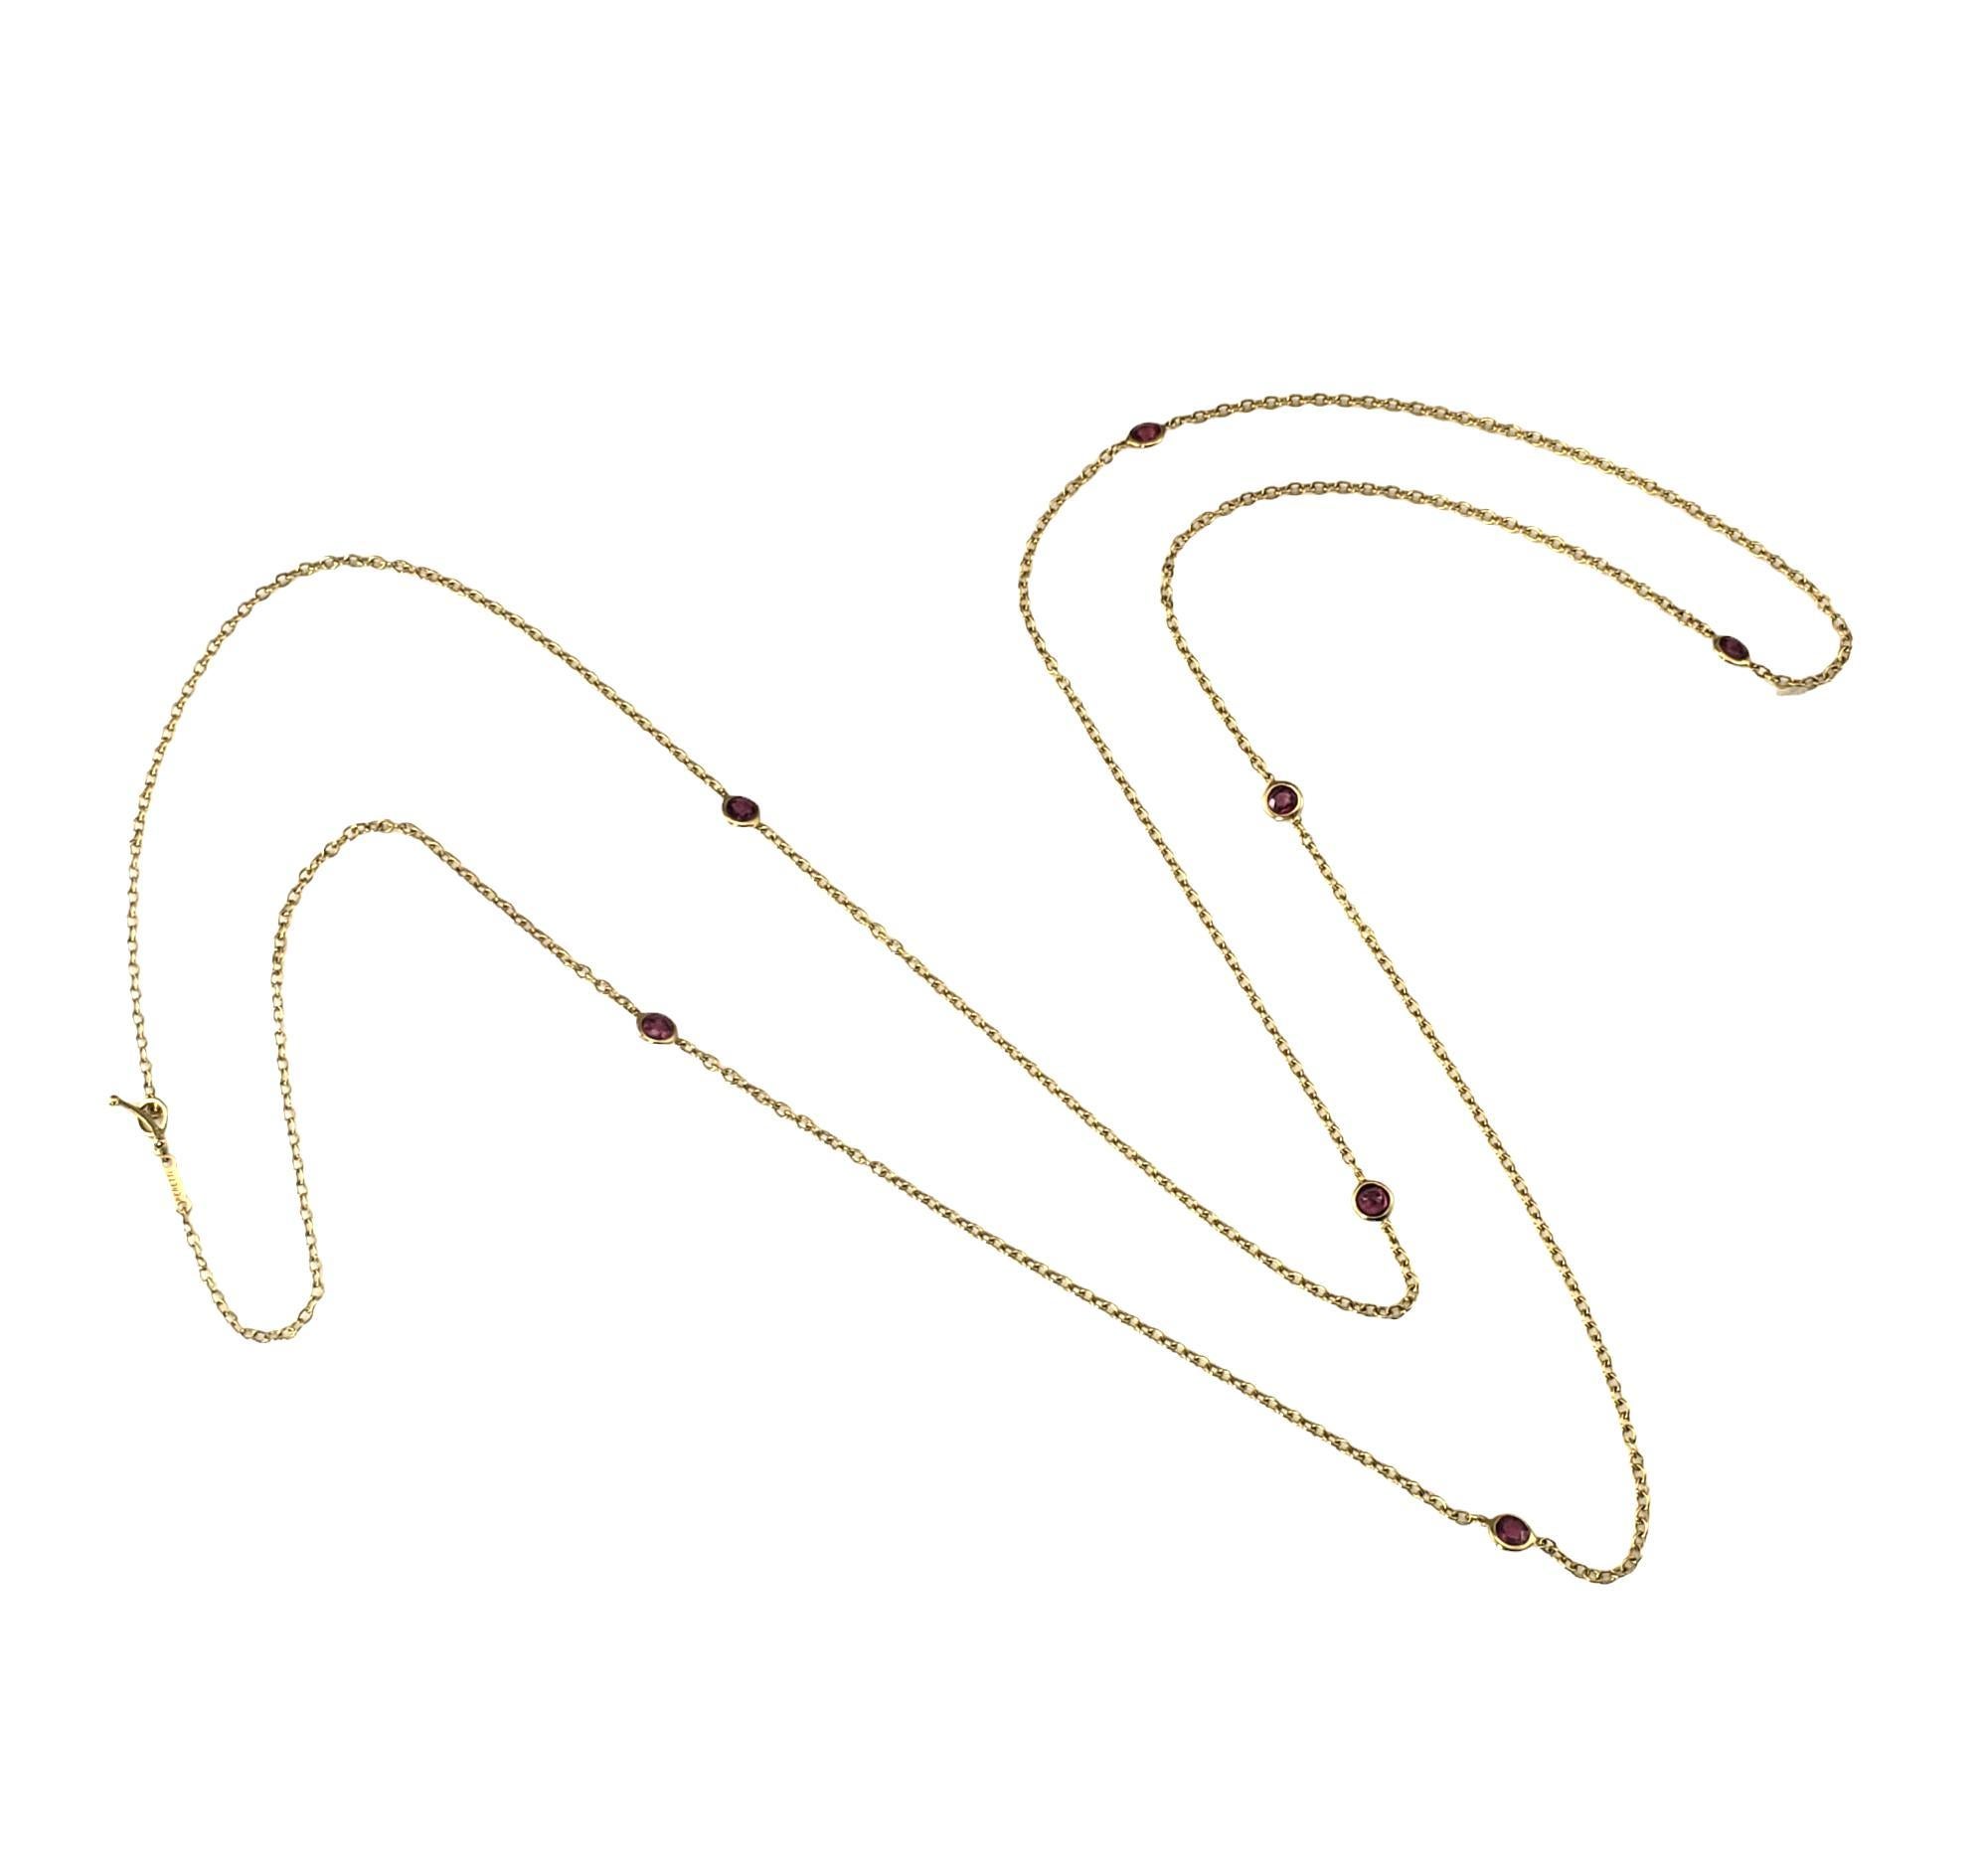 Tiffany & Co. Elsa Peretti Color by the Yard 18K Yellow Gold and Ruby Necklace

This elegant station necklace features seven bezel set rubies (5 mm)  on a classic 18K yellow gold chain.  By Elsa Peretti for Tiffany & Co. Toggle closure.

Size: 39